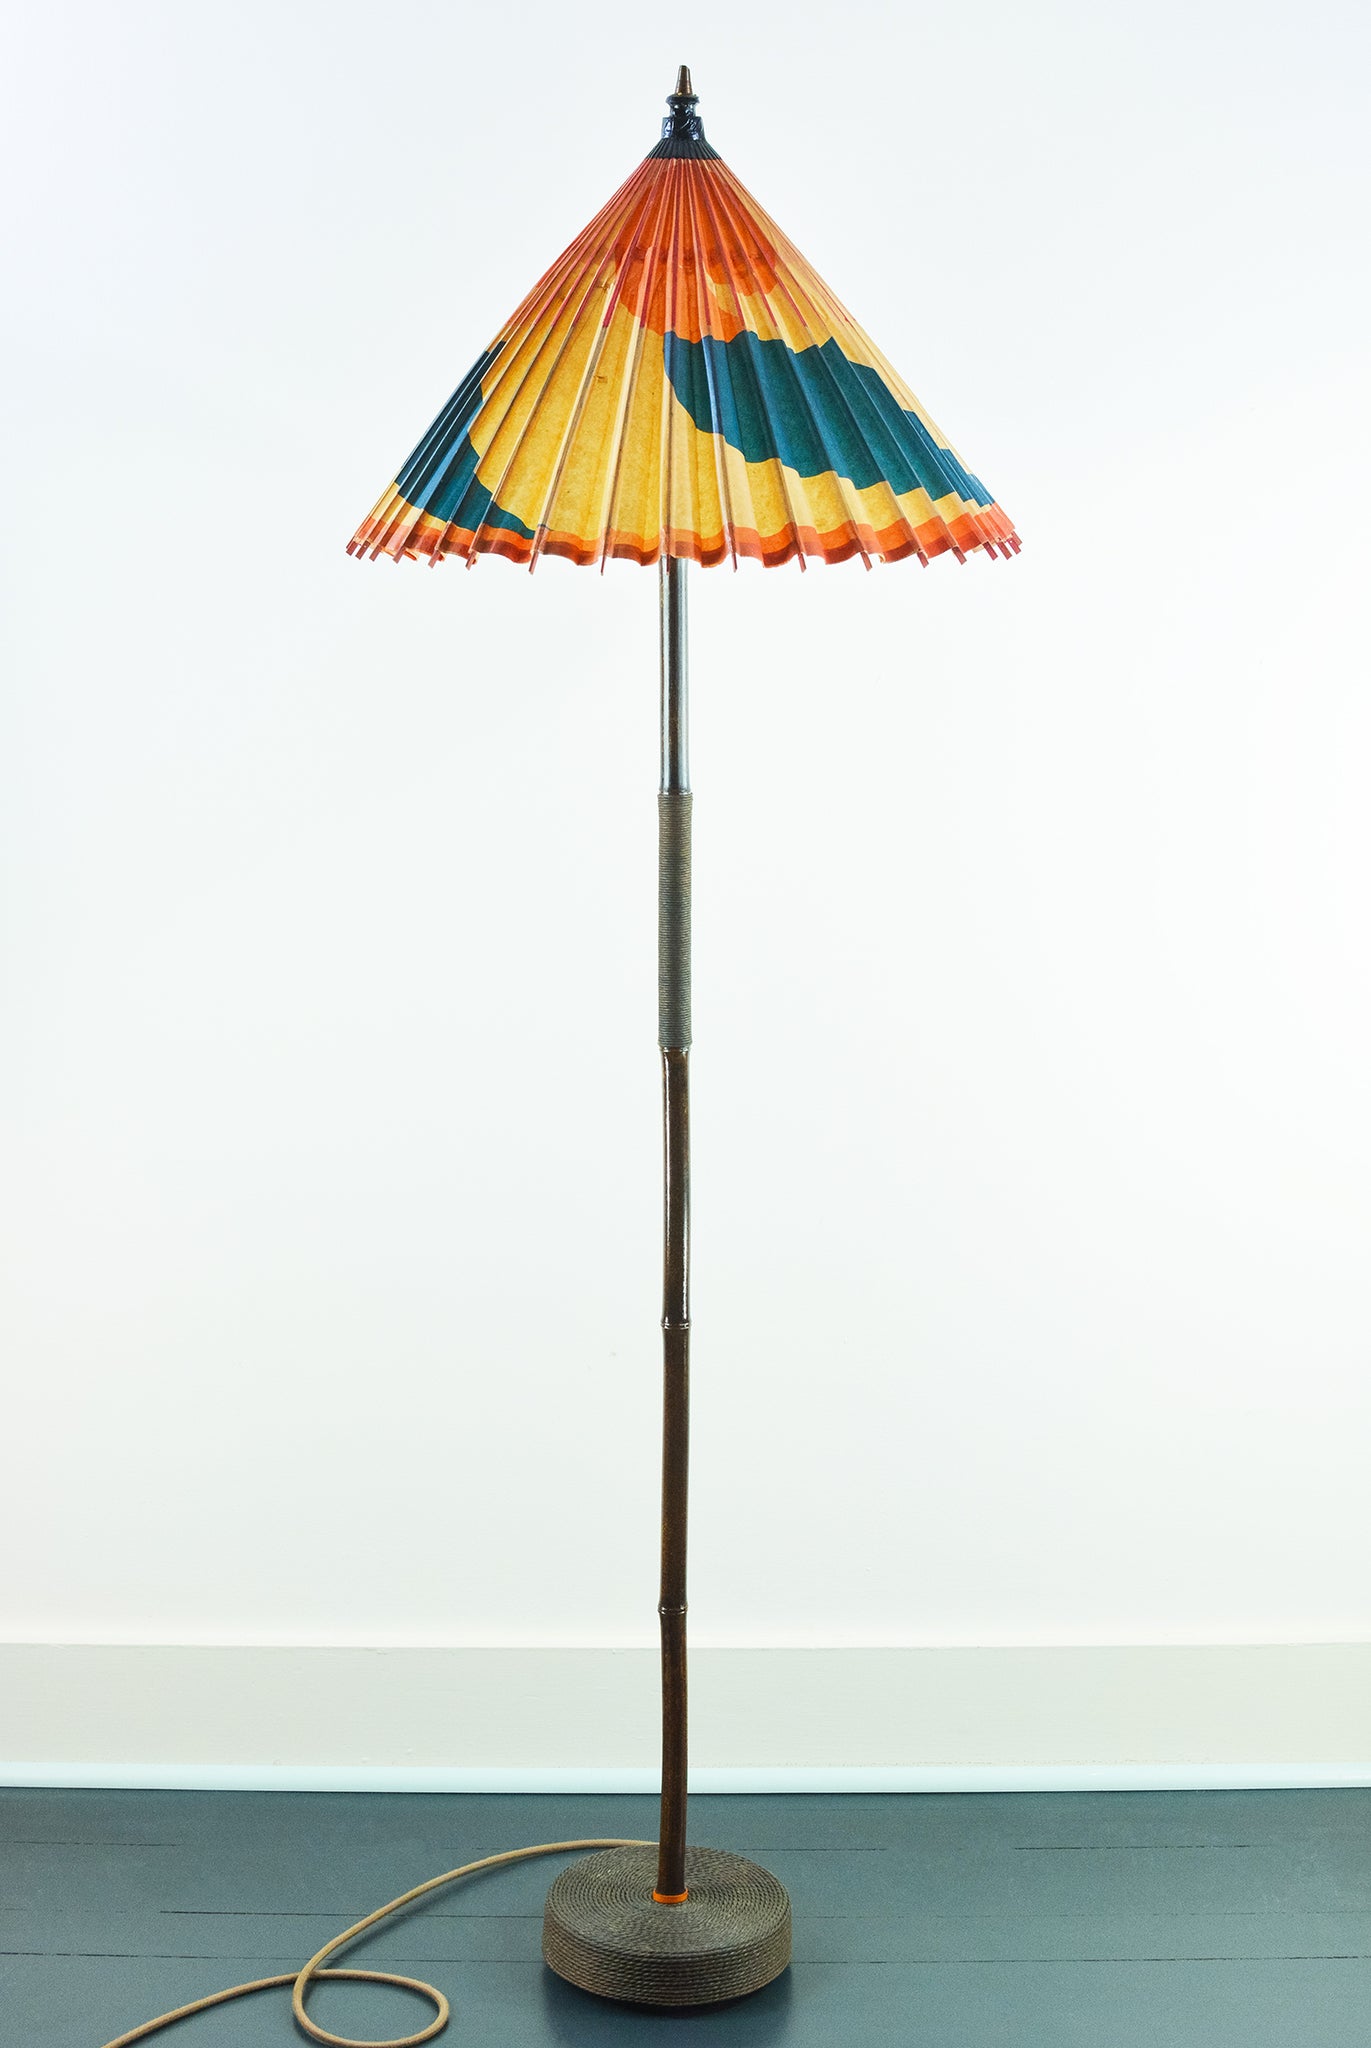 1933 Chicago 'World’s Fair' Black Bamboo Floor Lamp with Parasol Shade and Coiled Seagrass Base